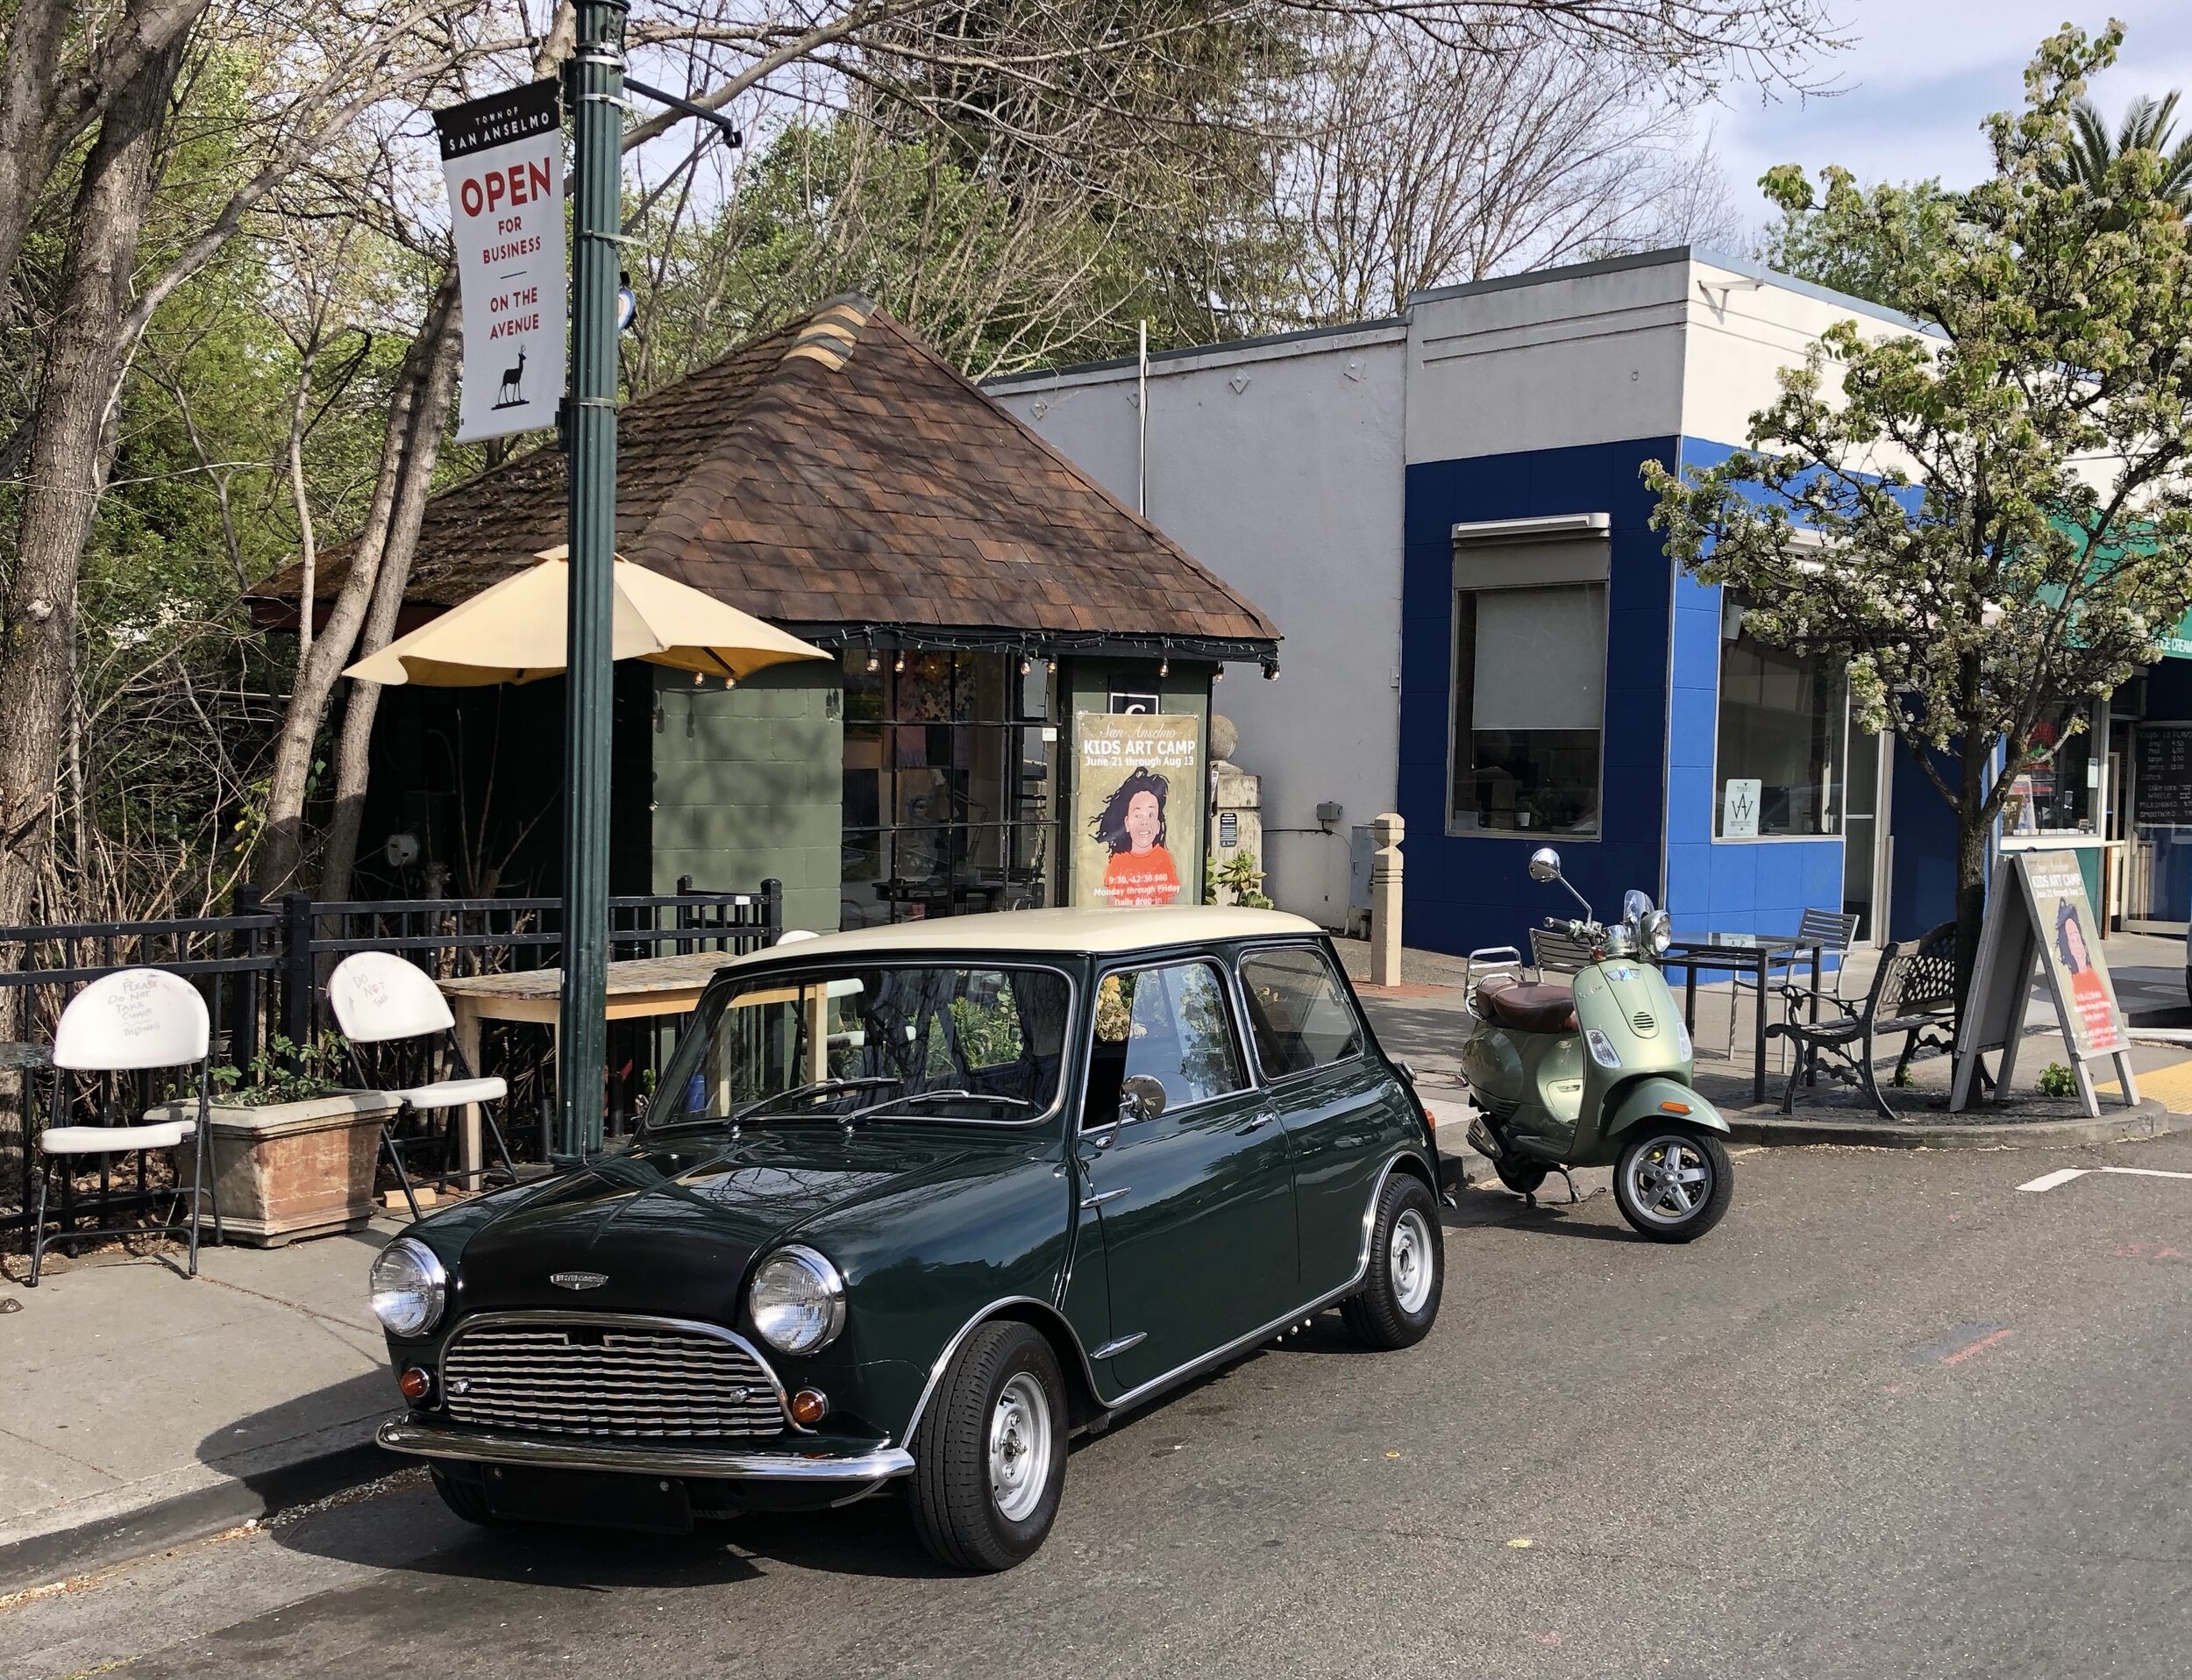 Our VESPA cozying up to an A+ looking restored AUSTIN COOPER Mini in downtown San Anselmo.